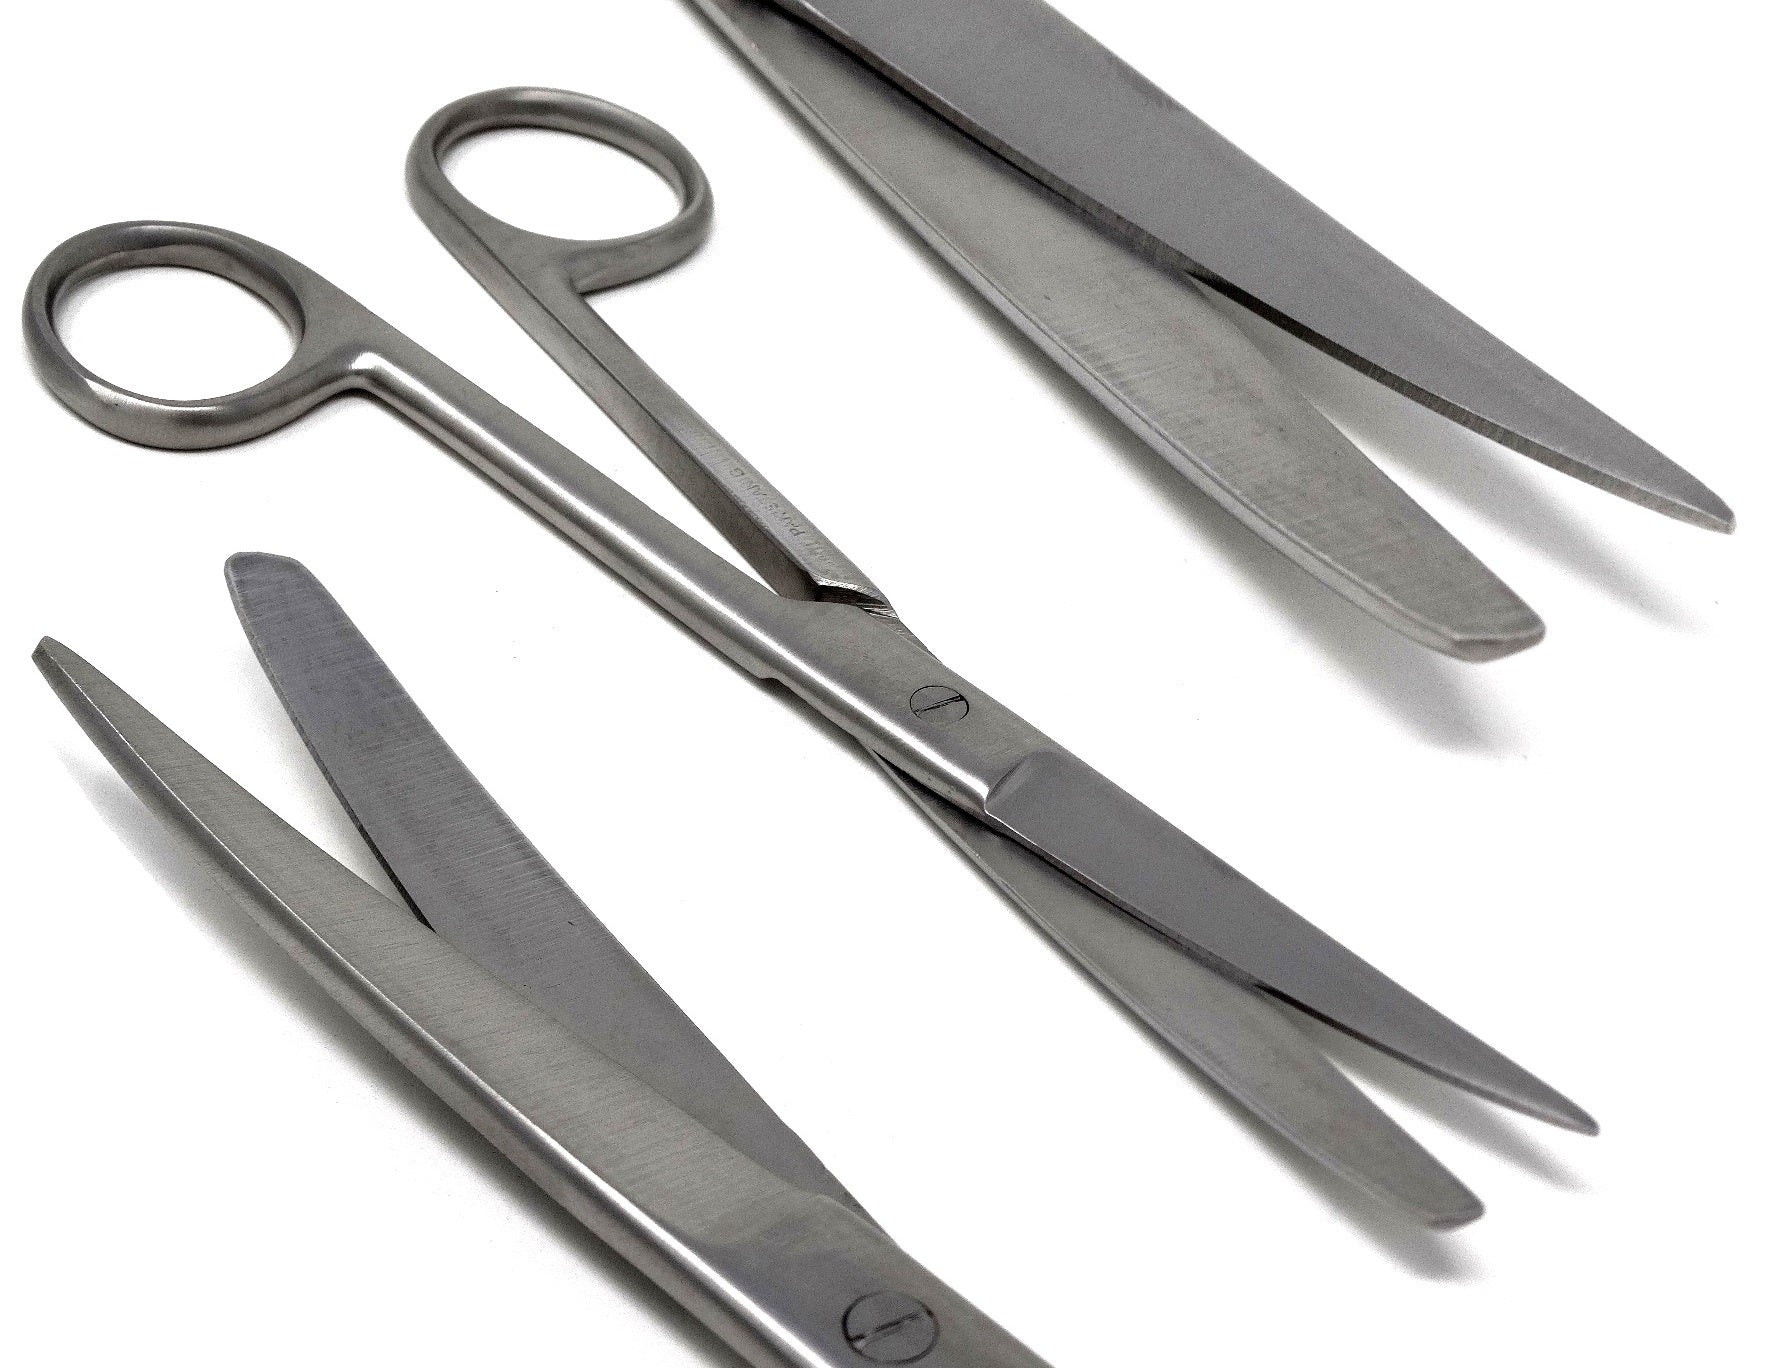 Medical Surgical Operating Dissecting Straight Scissors 4.5 Sharp/Sharp  Instruments